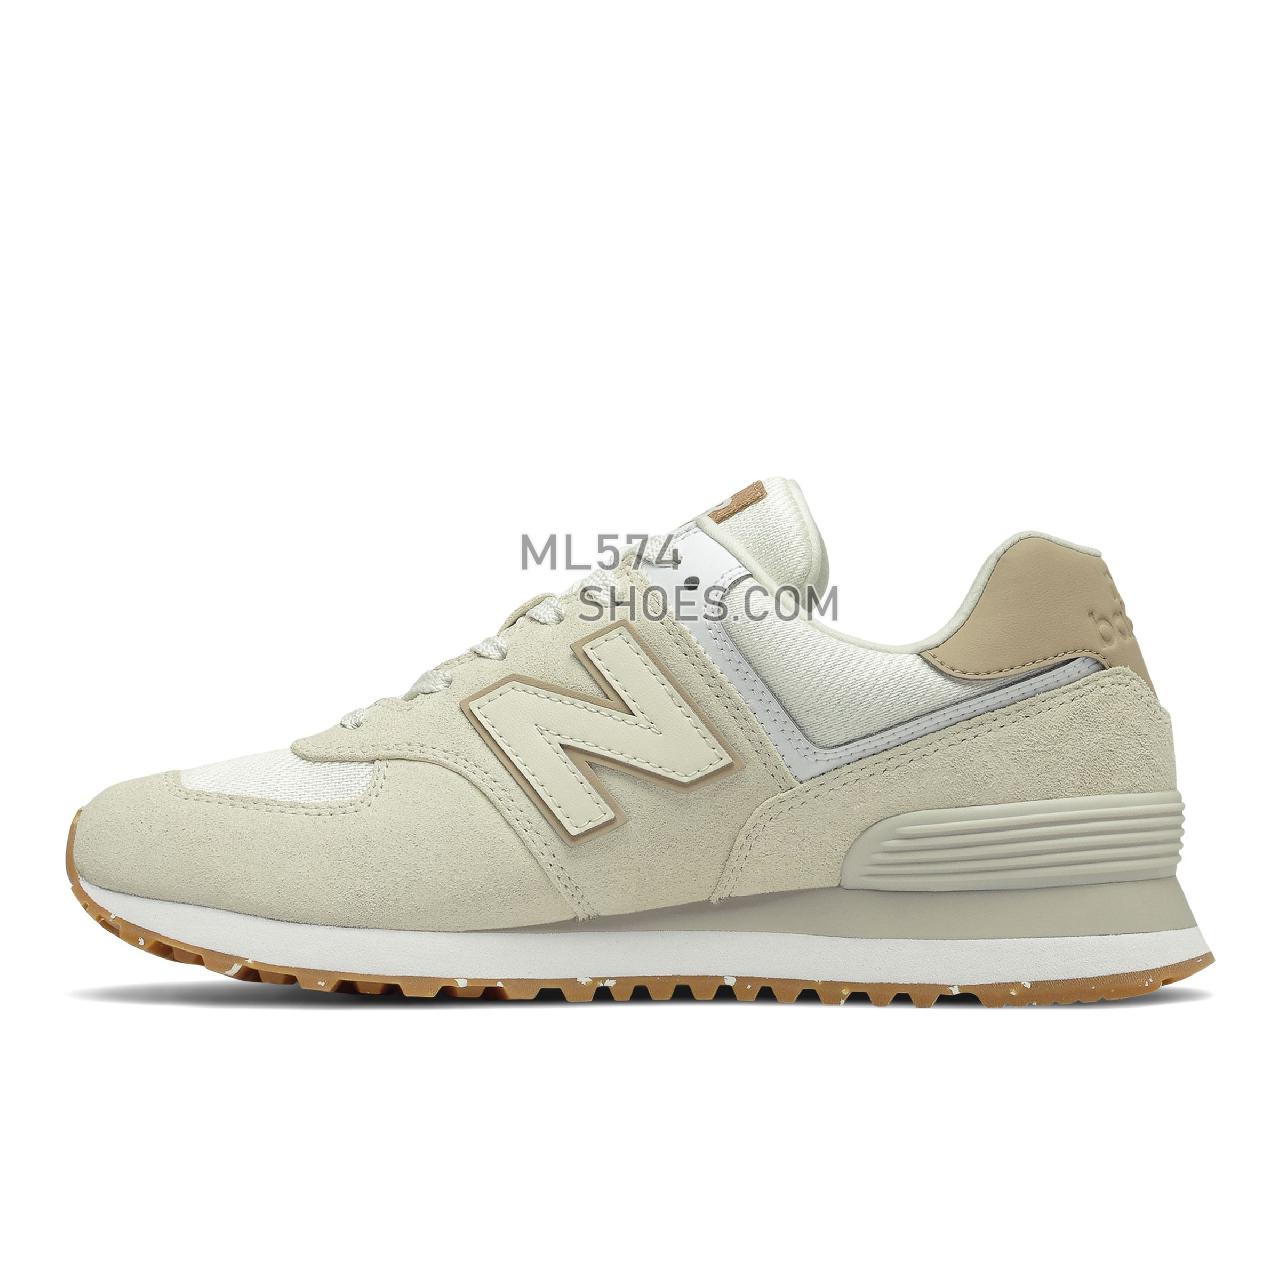 New Balance 574 - Women's Classic Sneakers - Angora with Incense - WL574SL2